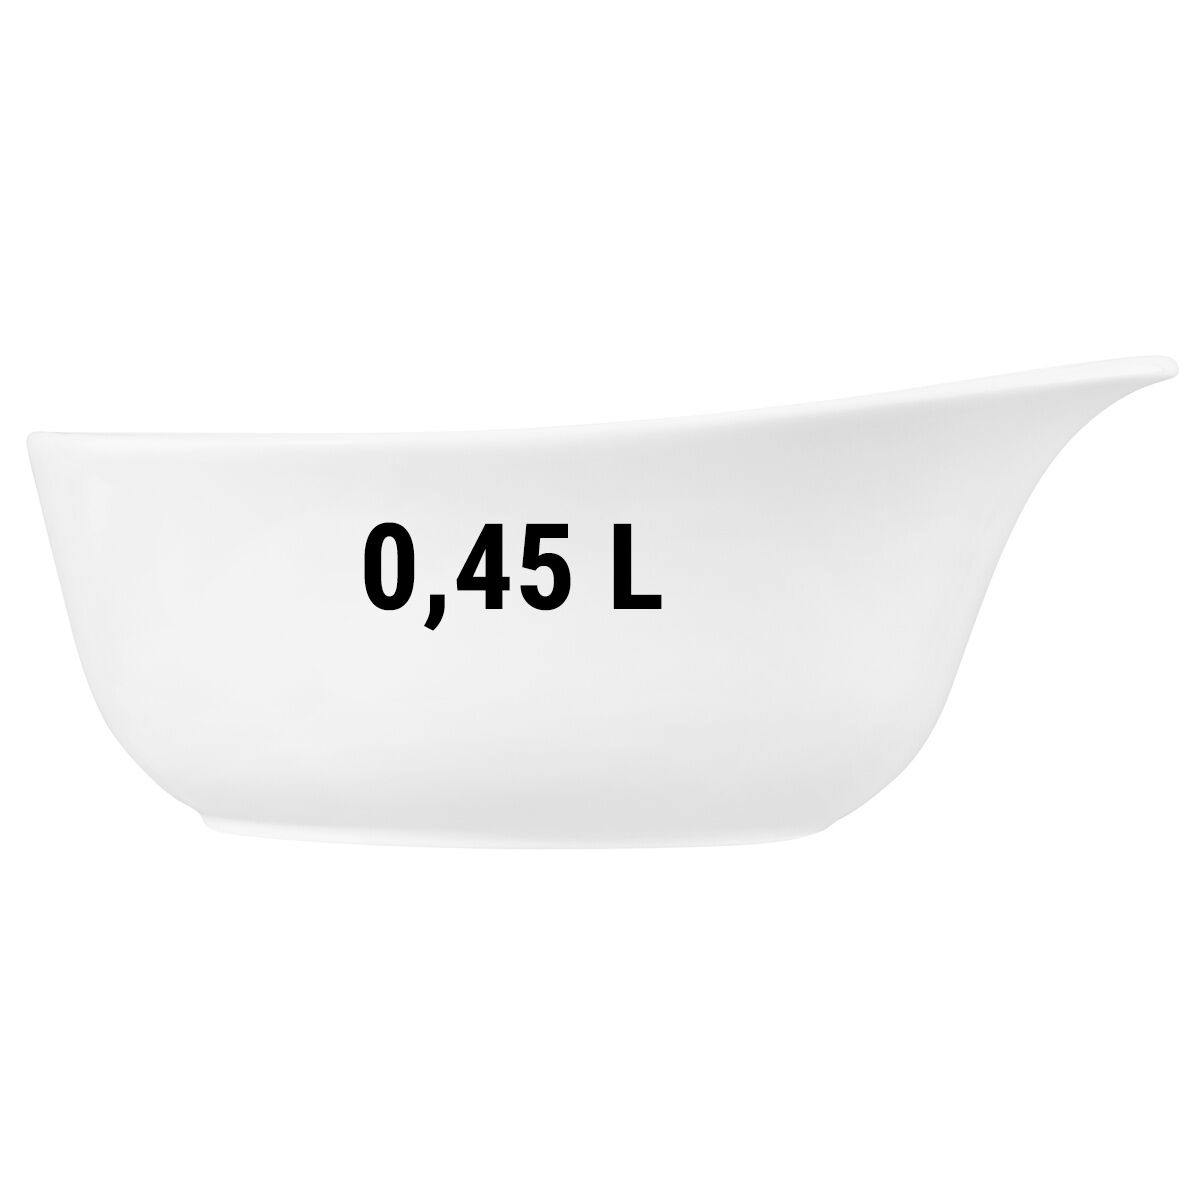 (2 pieces) Seltmann Weiden - Cereal bowl with handle - 0.45 liters